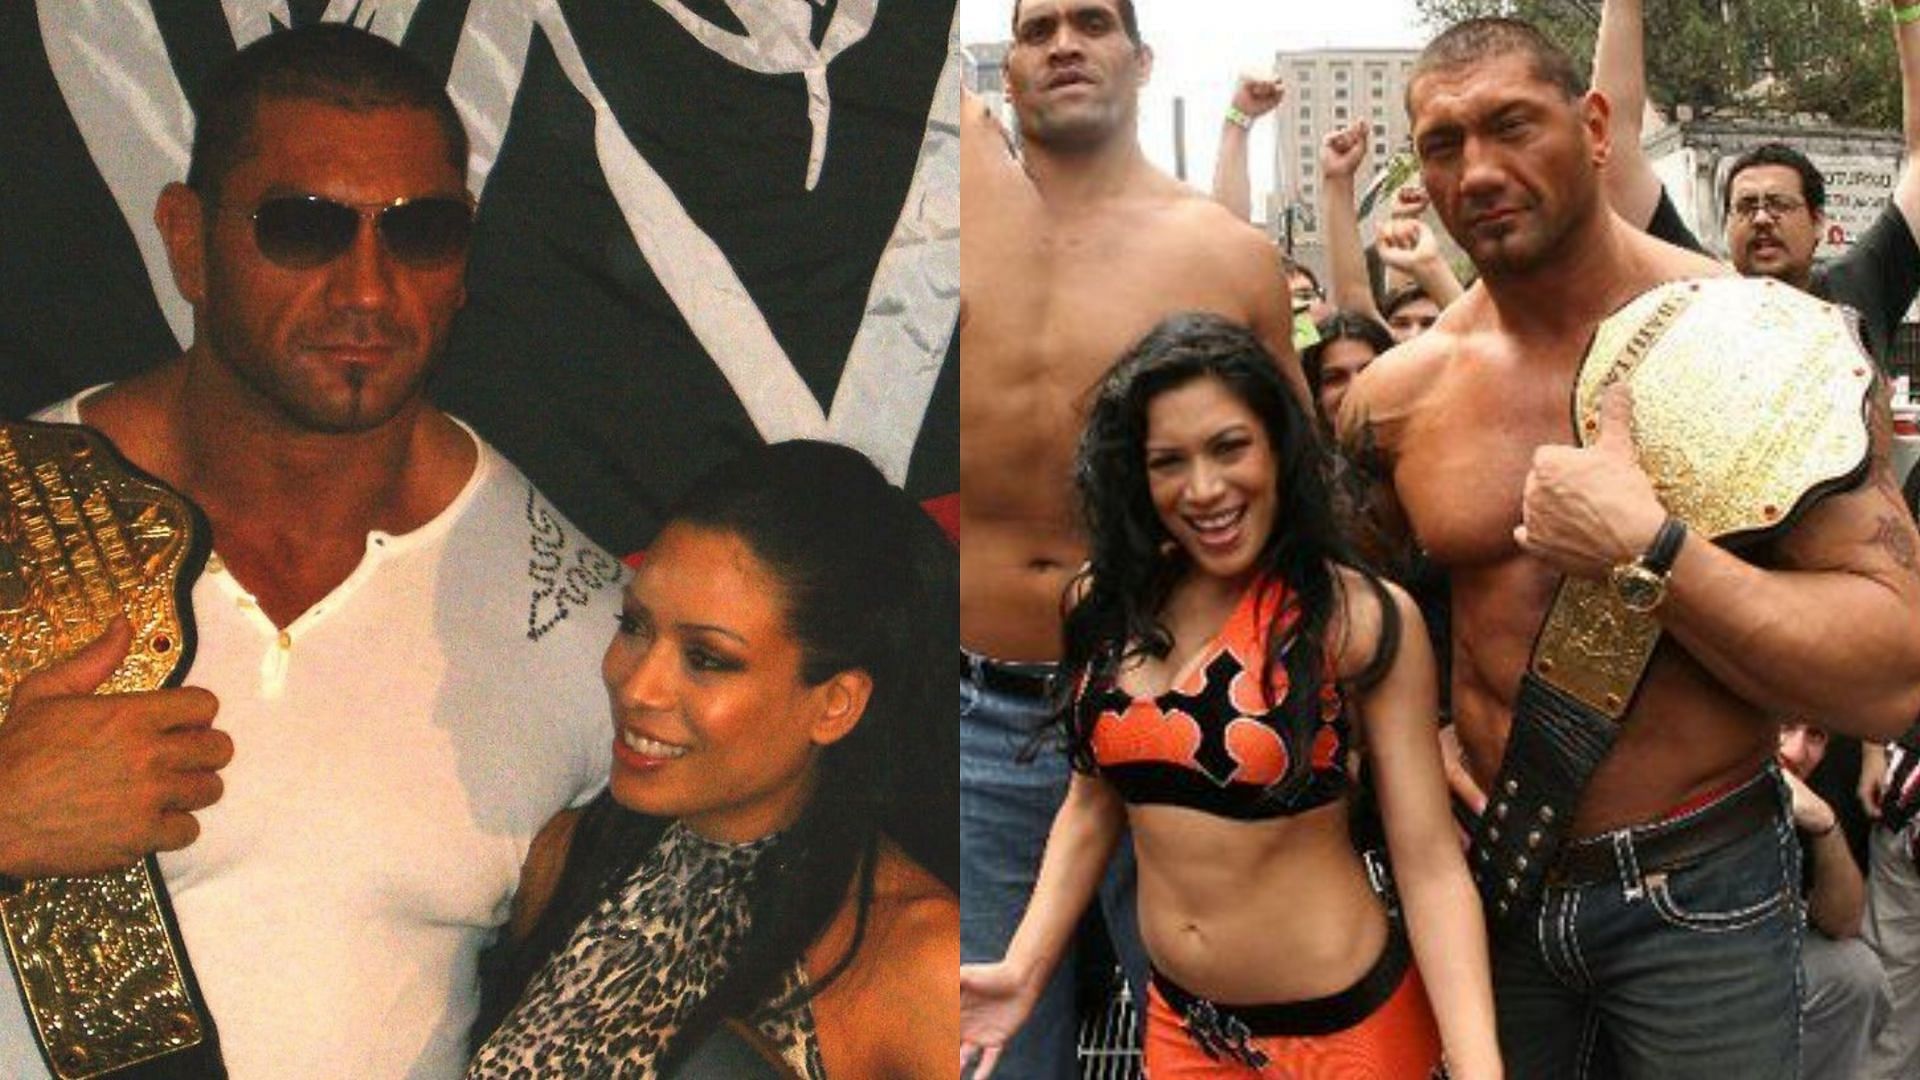 Melina and Batista initially disliked each other